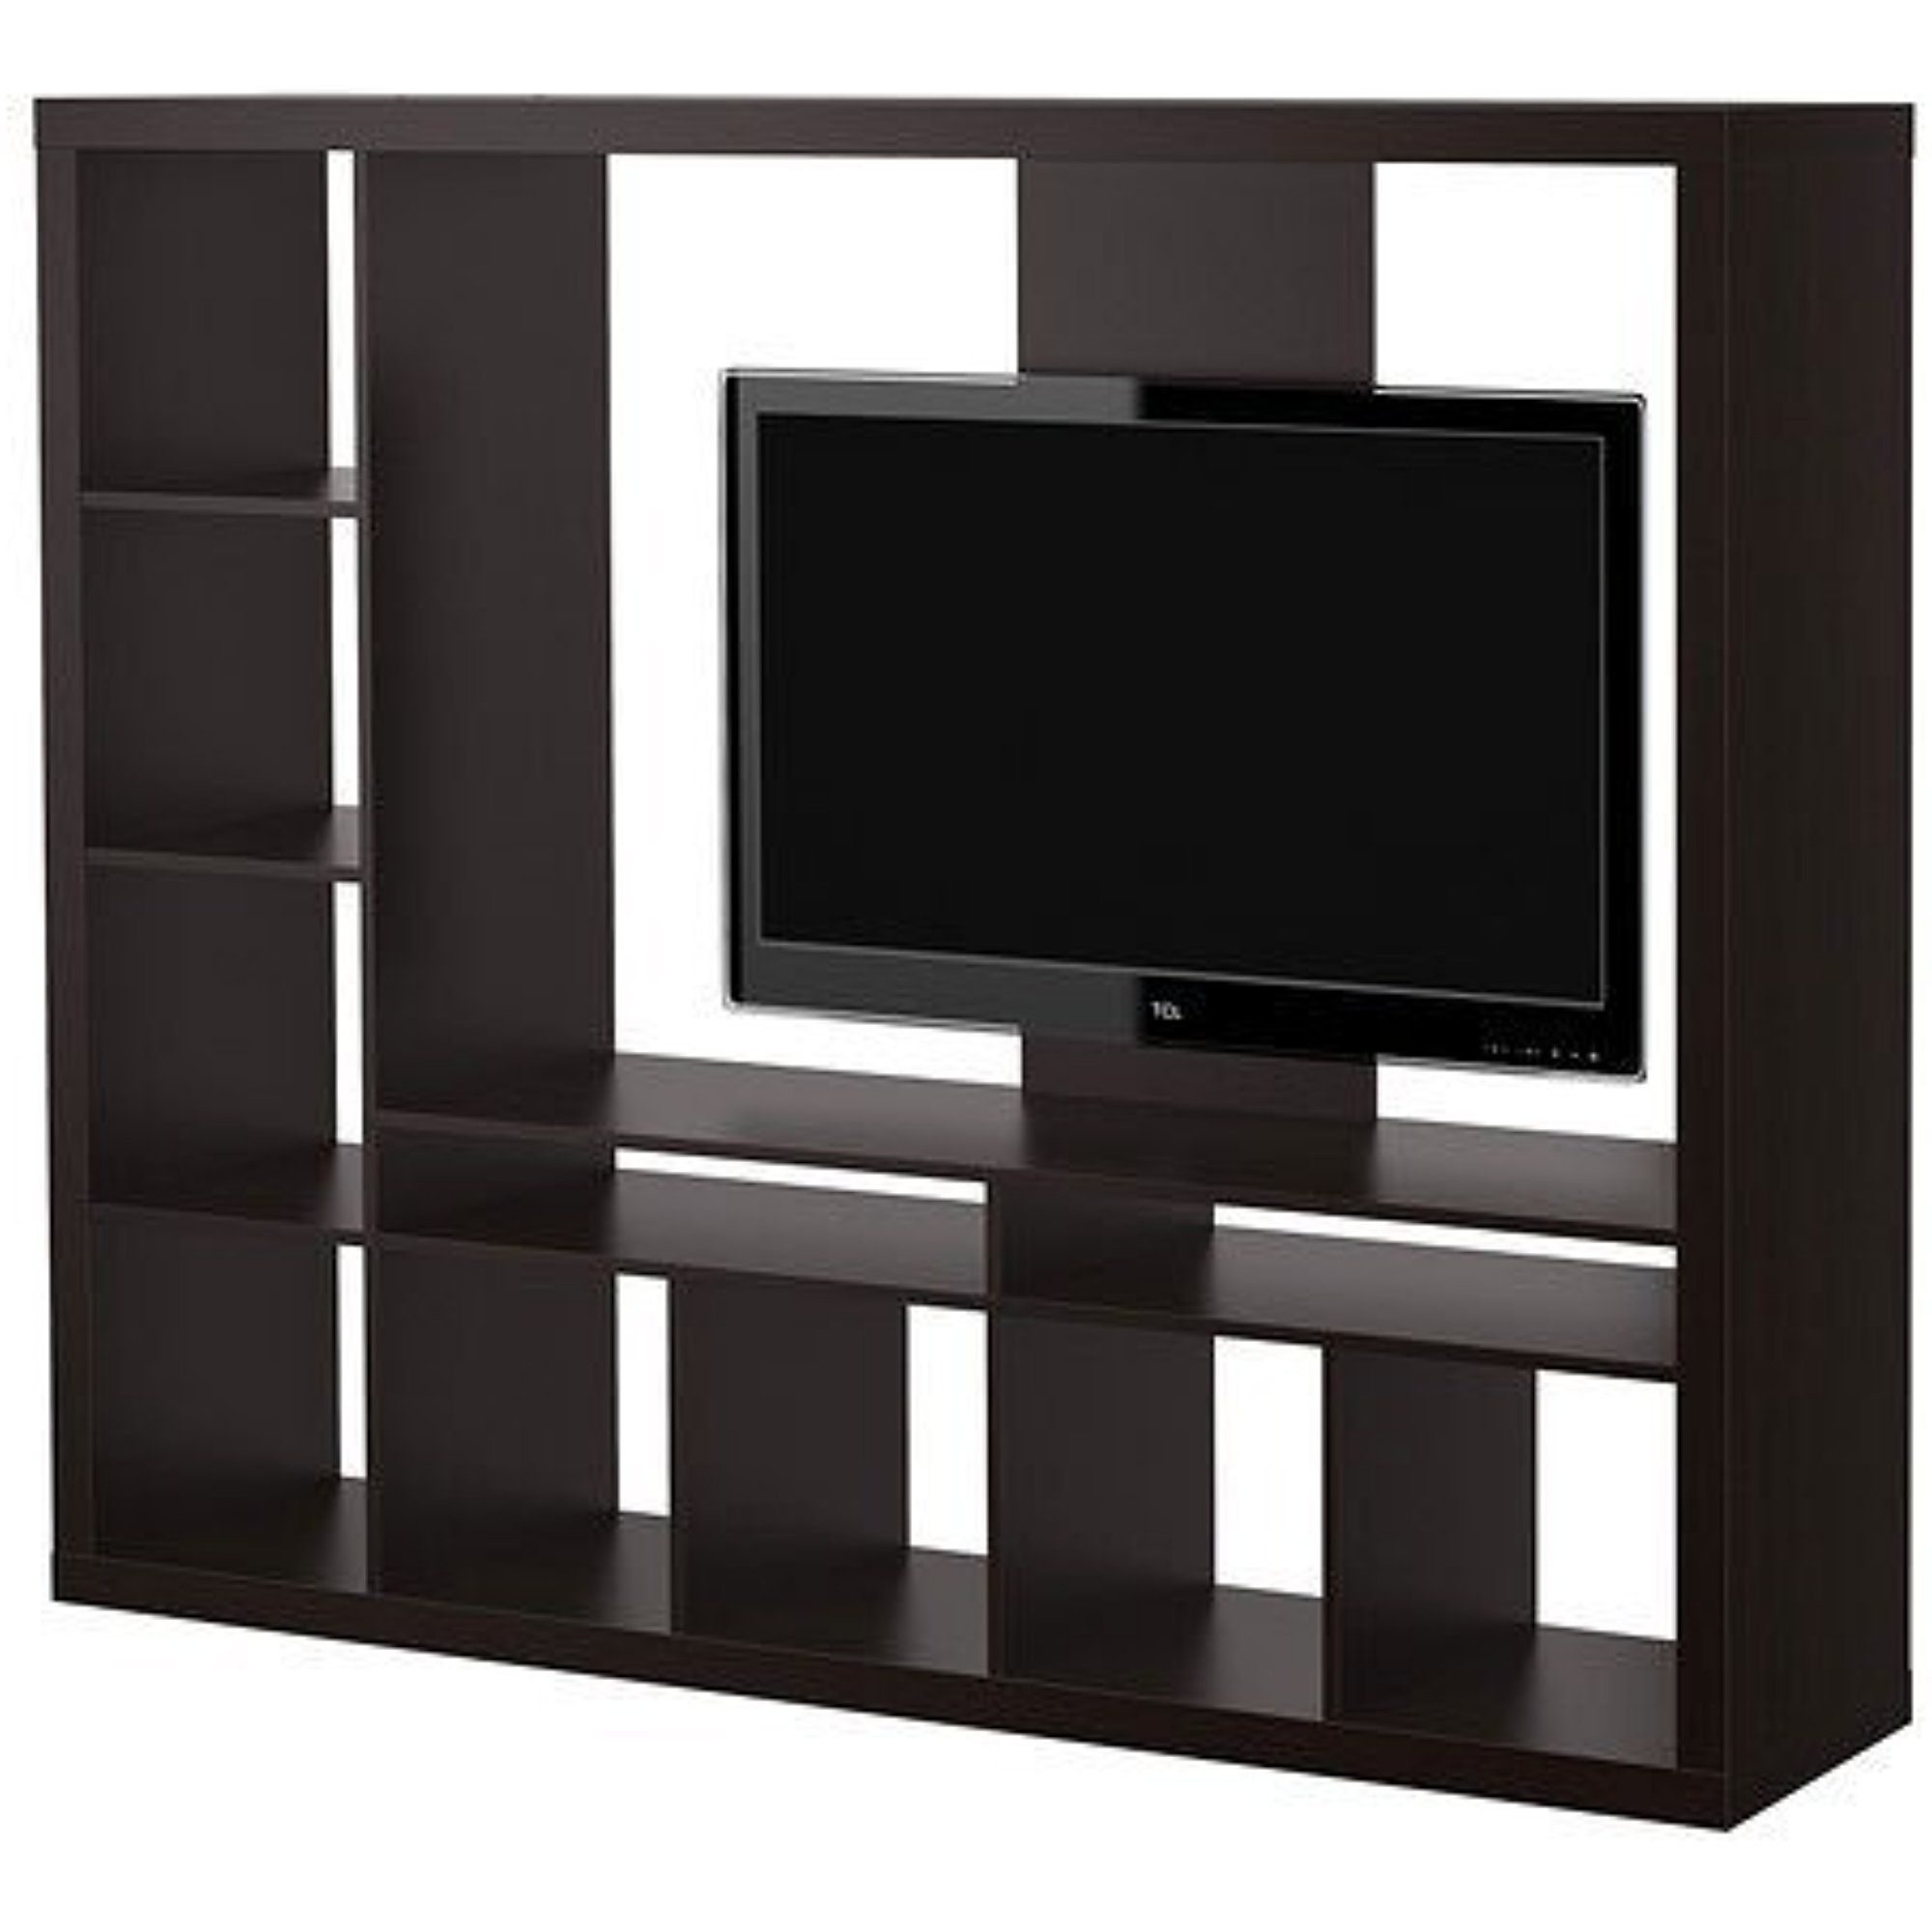 Ikea Expedit Entertainment Center Tv Stand Up To 55" Flat Regarding Sahika Tv Stands For Tvs Up To 55&quot; (View 12 of 15)